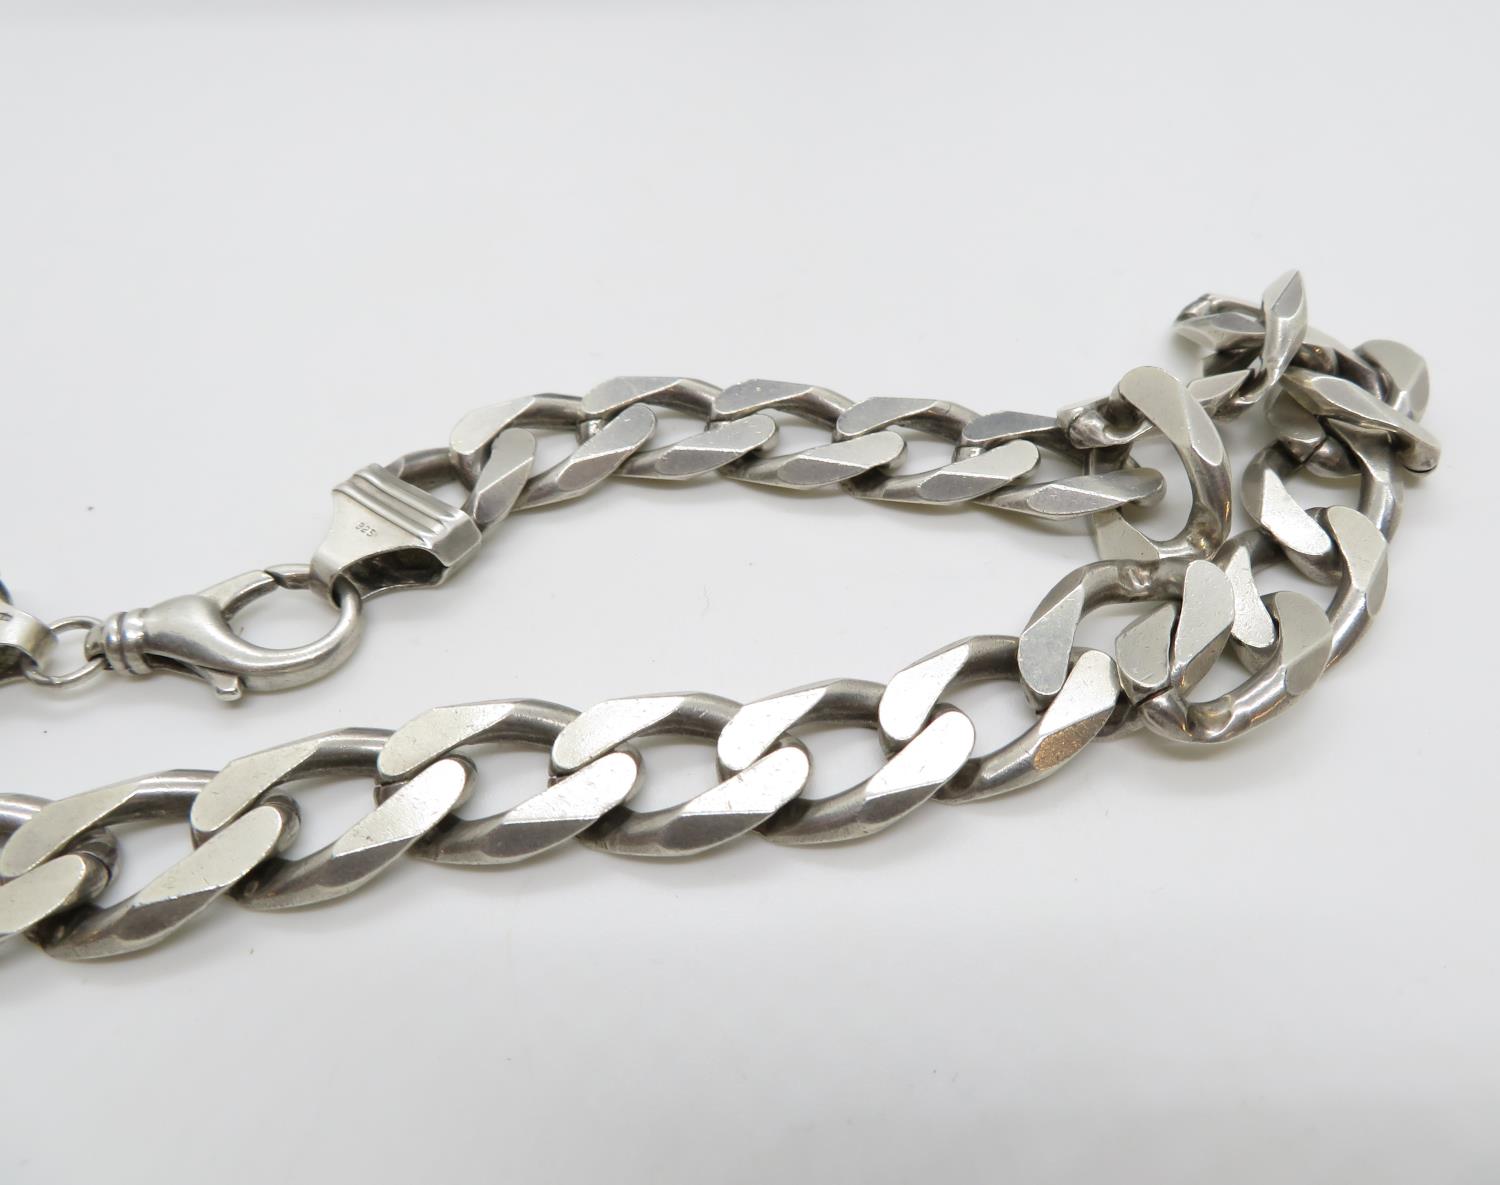 HM 925 silver heavy chain 145g 20" long - Image 3 of 3